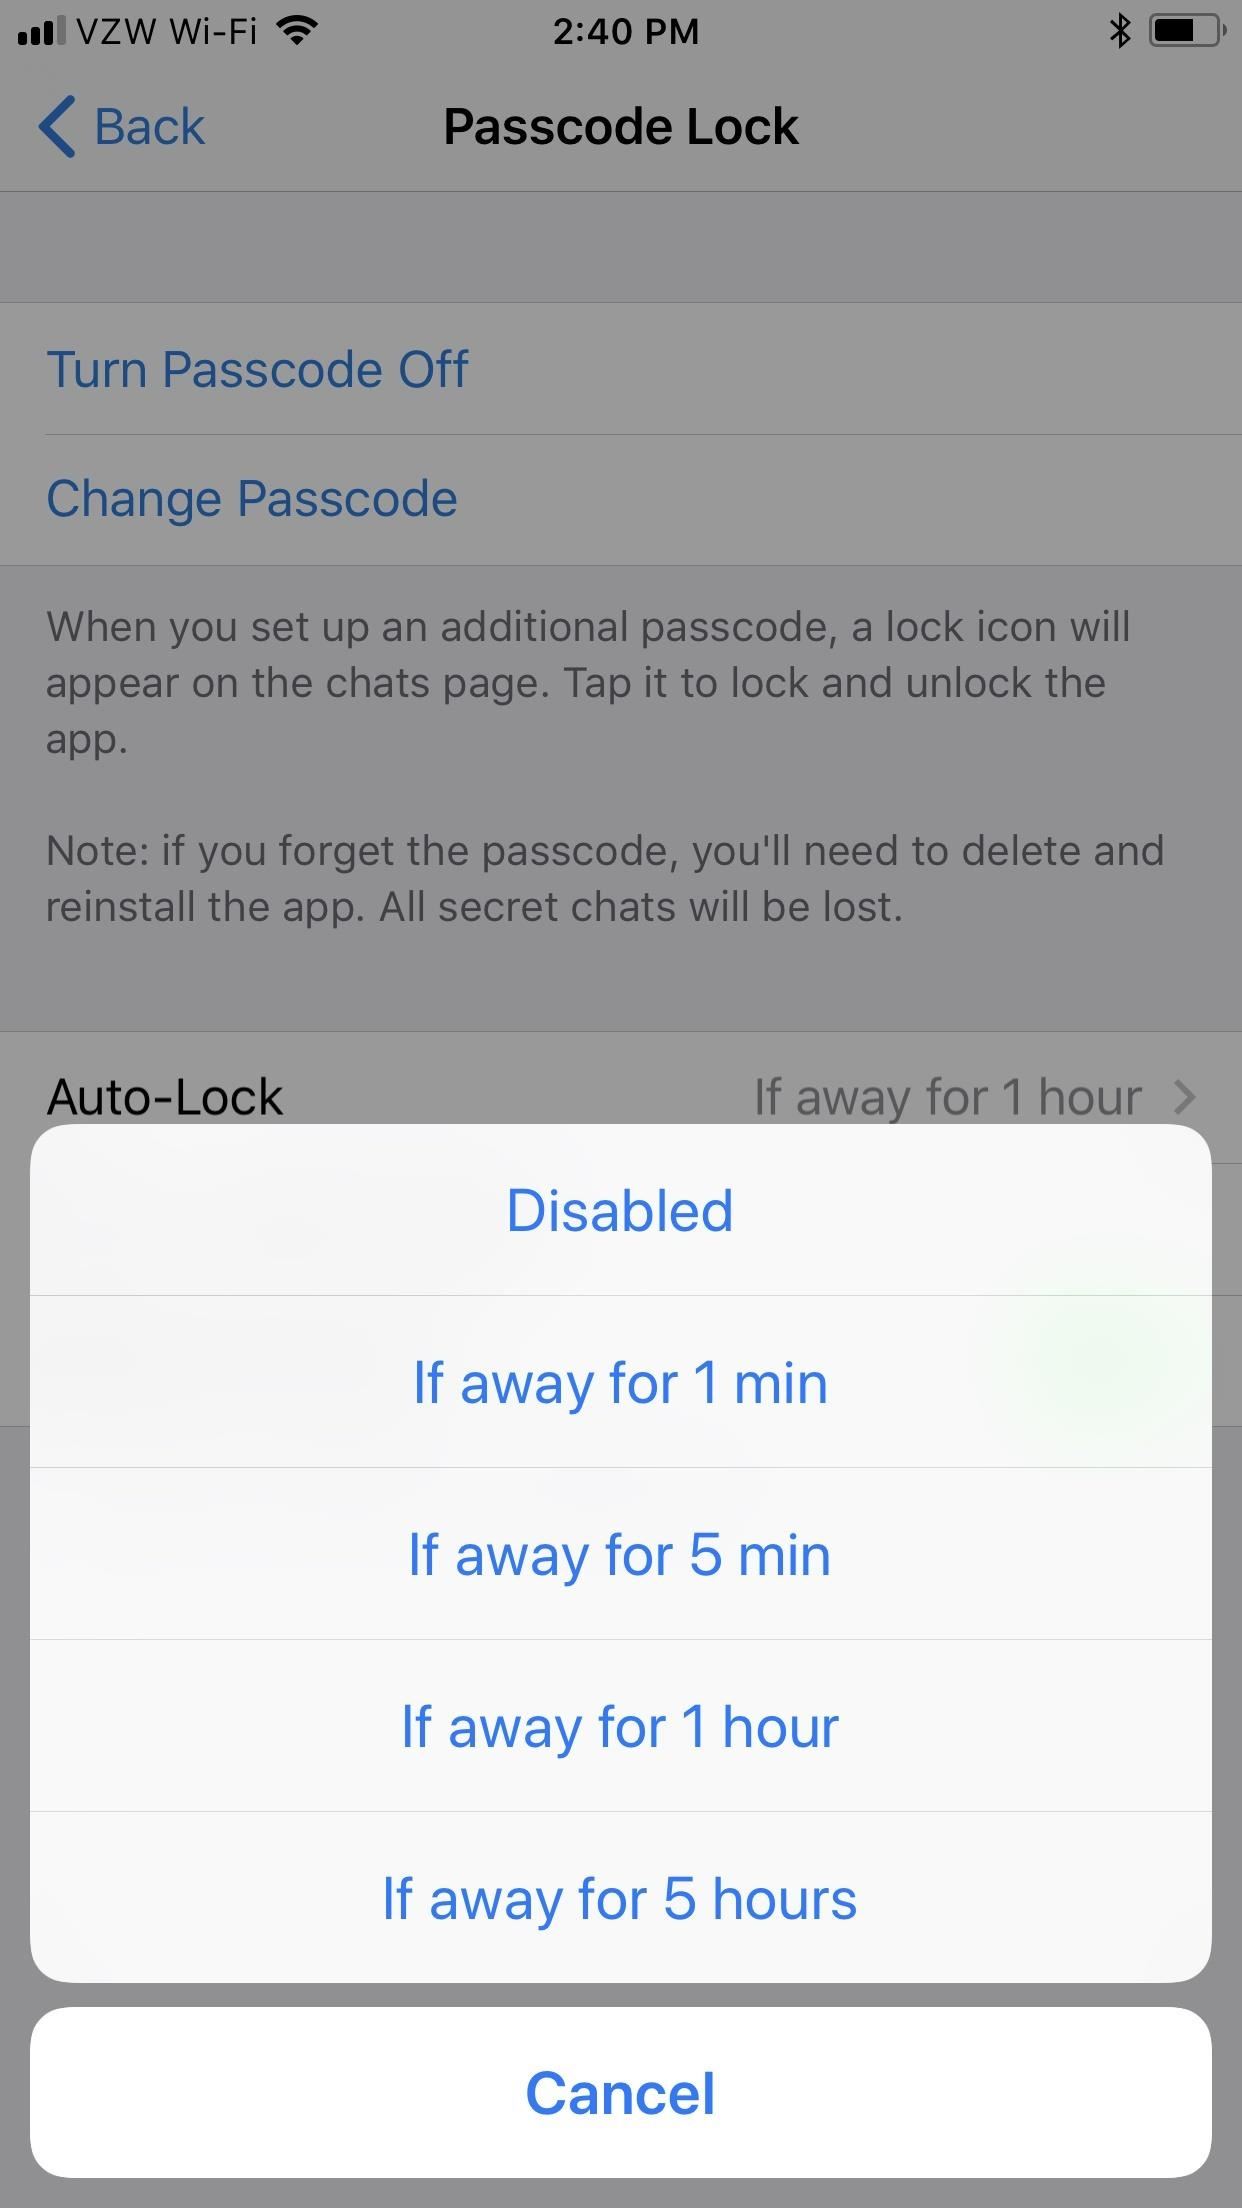 Telegram 101: How to Password-Protect Your Chats for Extra Security